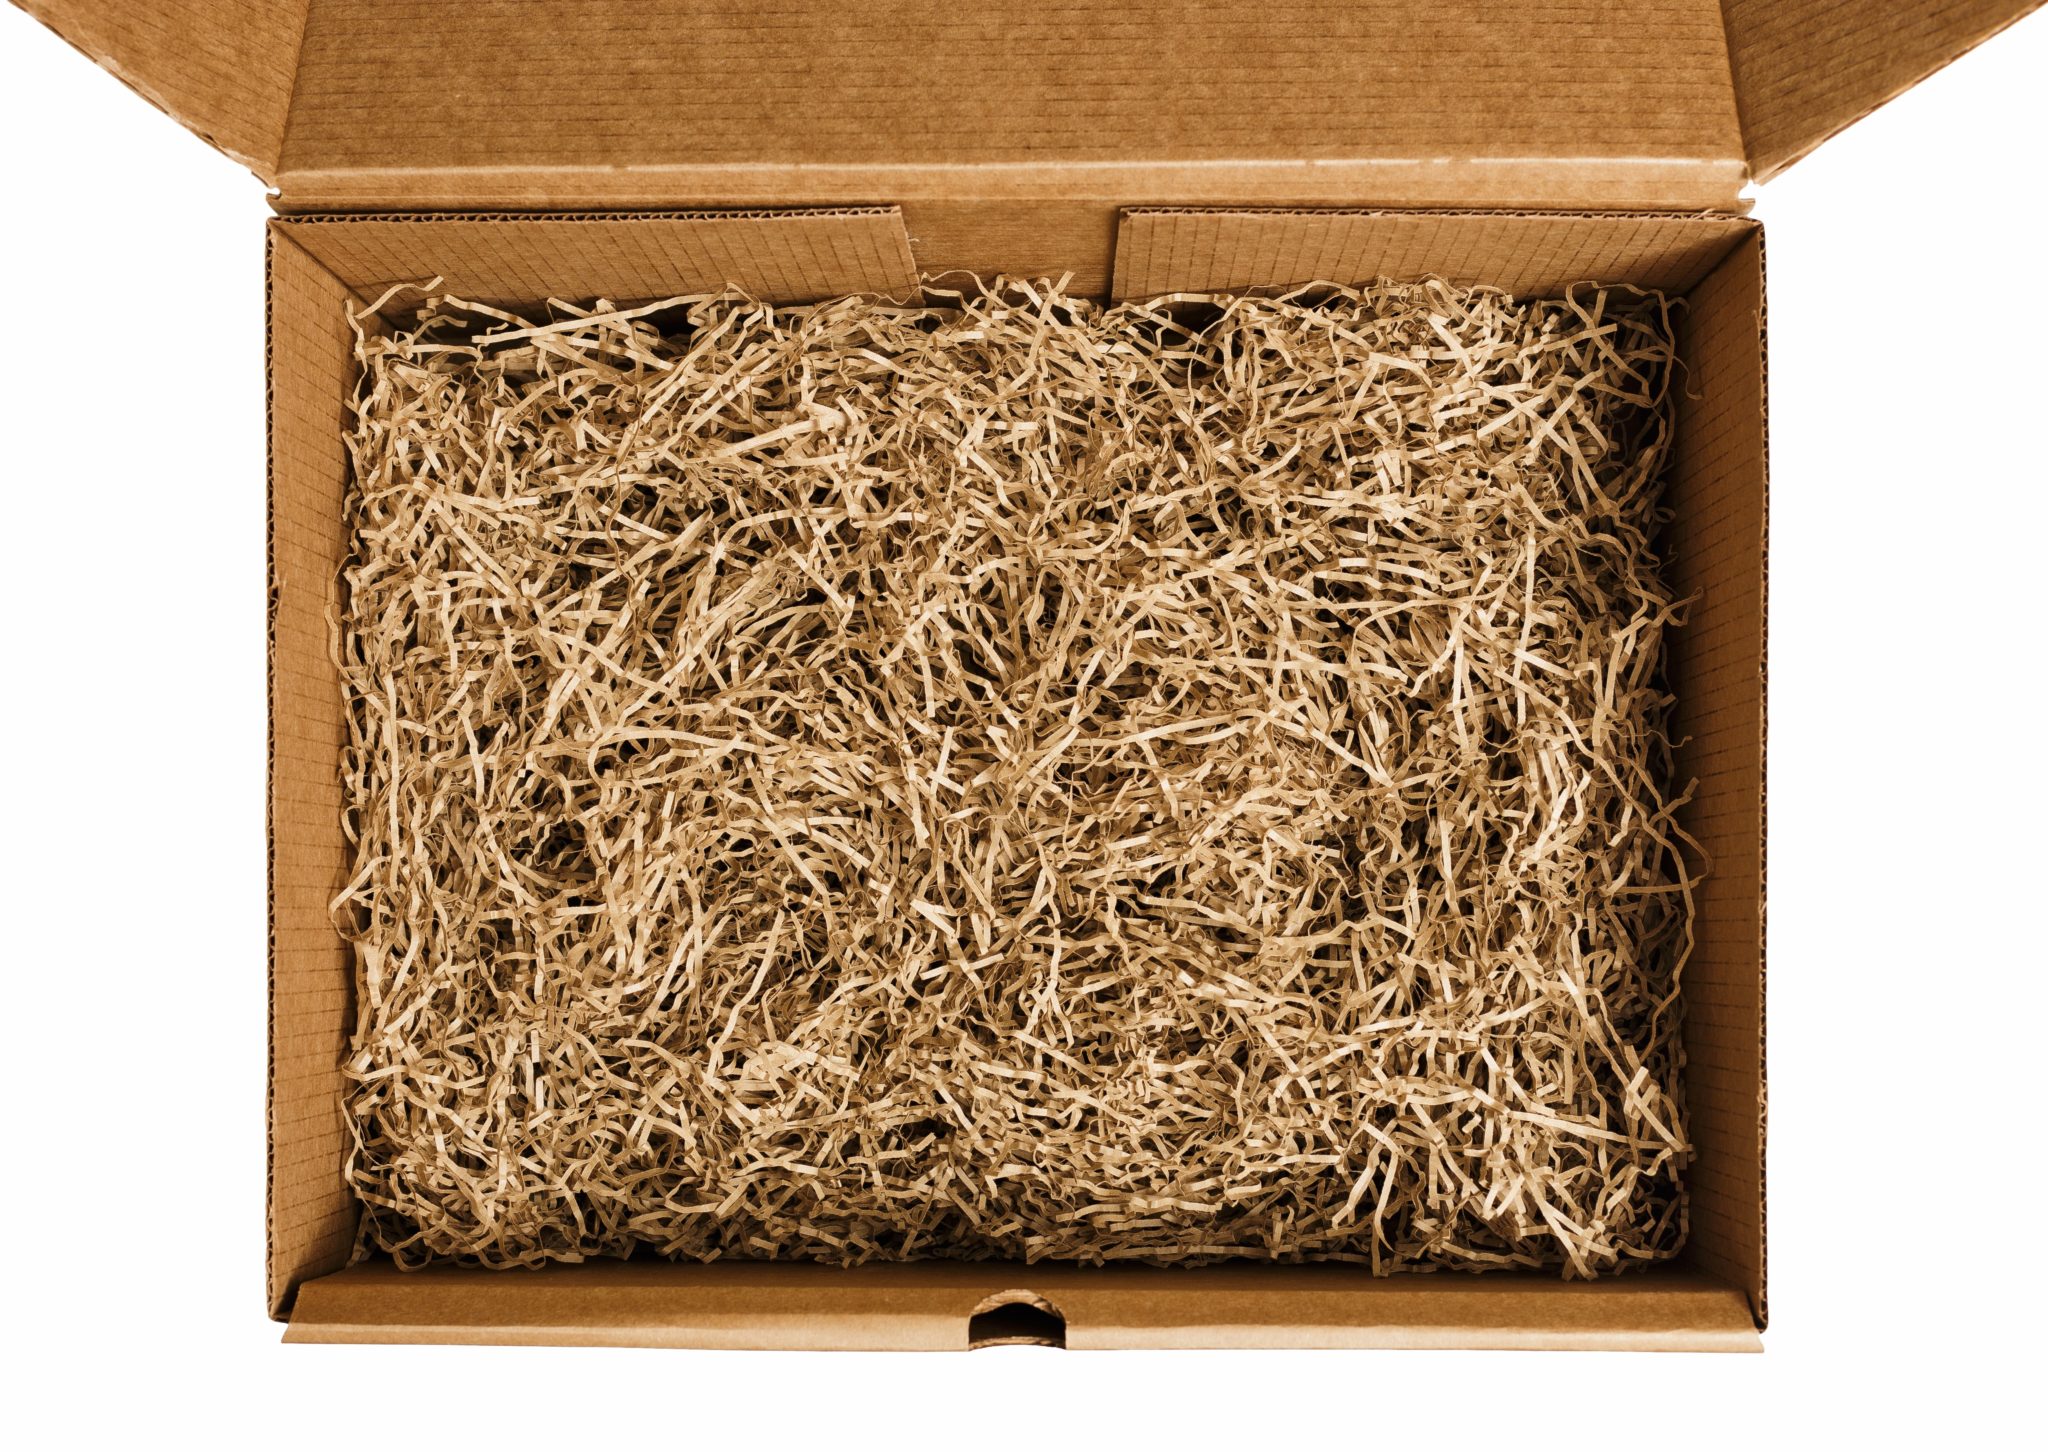 Packaging considerations and material alternatives - Retail Council of Canada